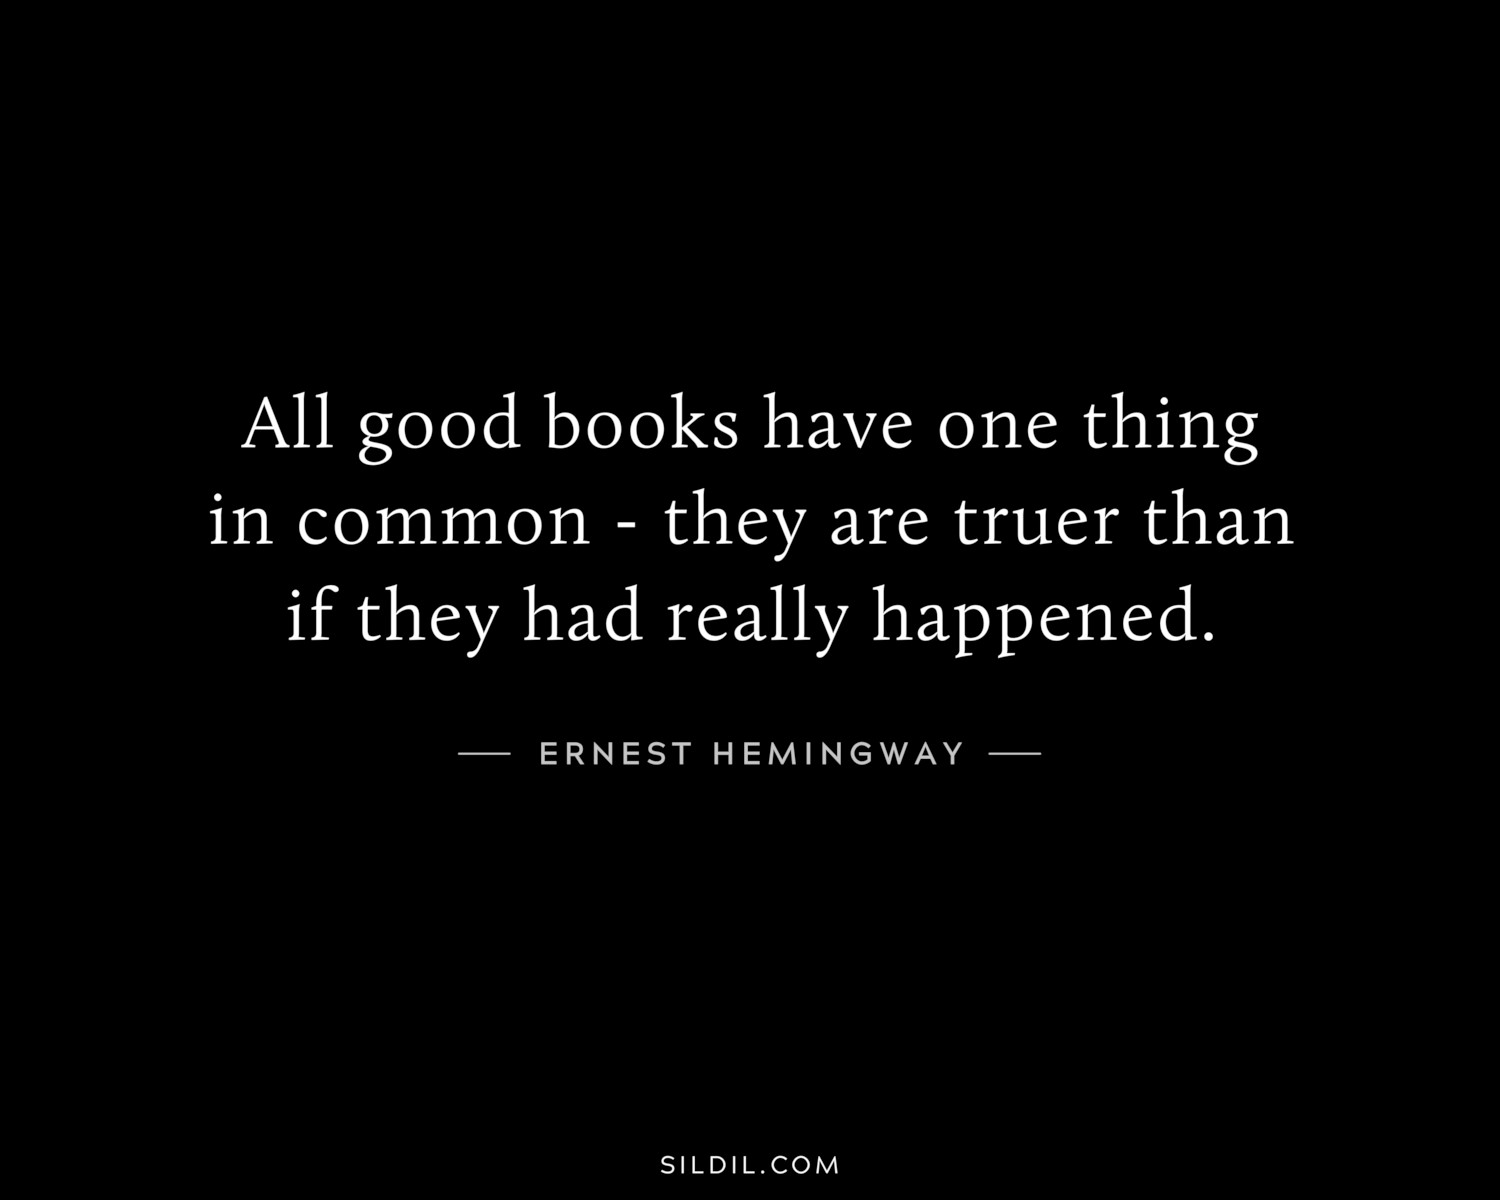 All good books have one thing in common - they are truer than if they had really happened.